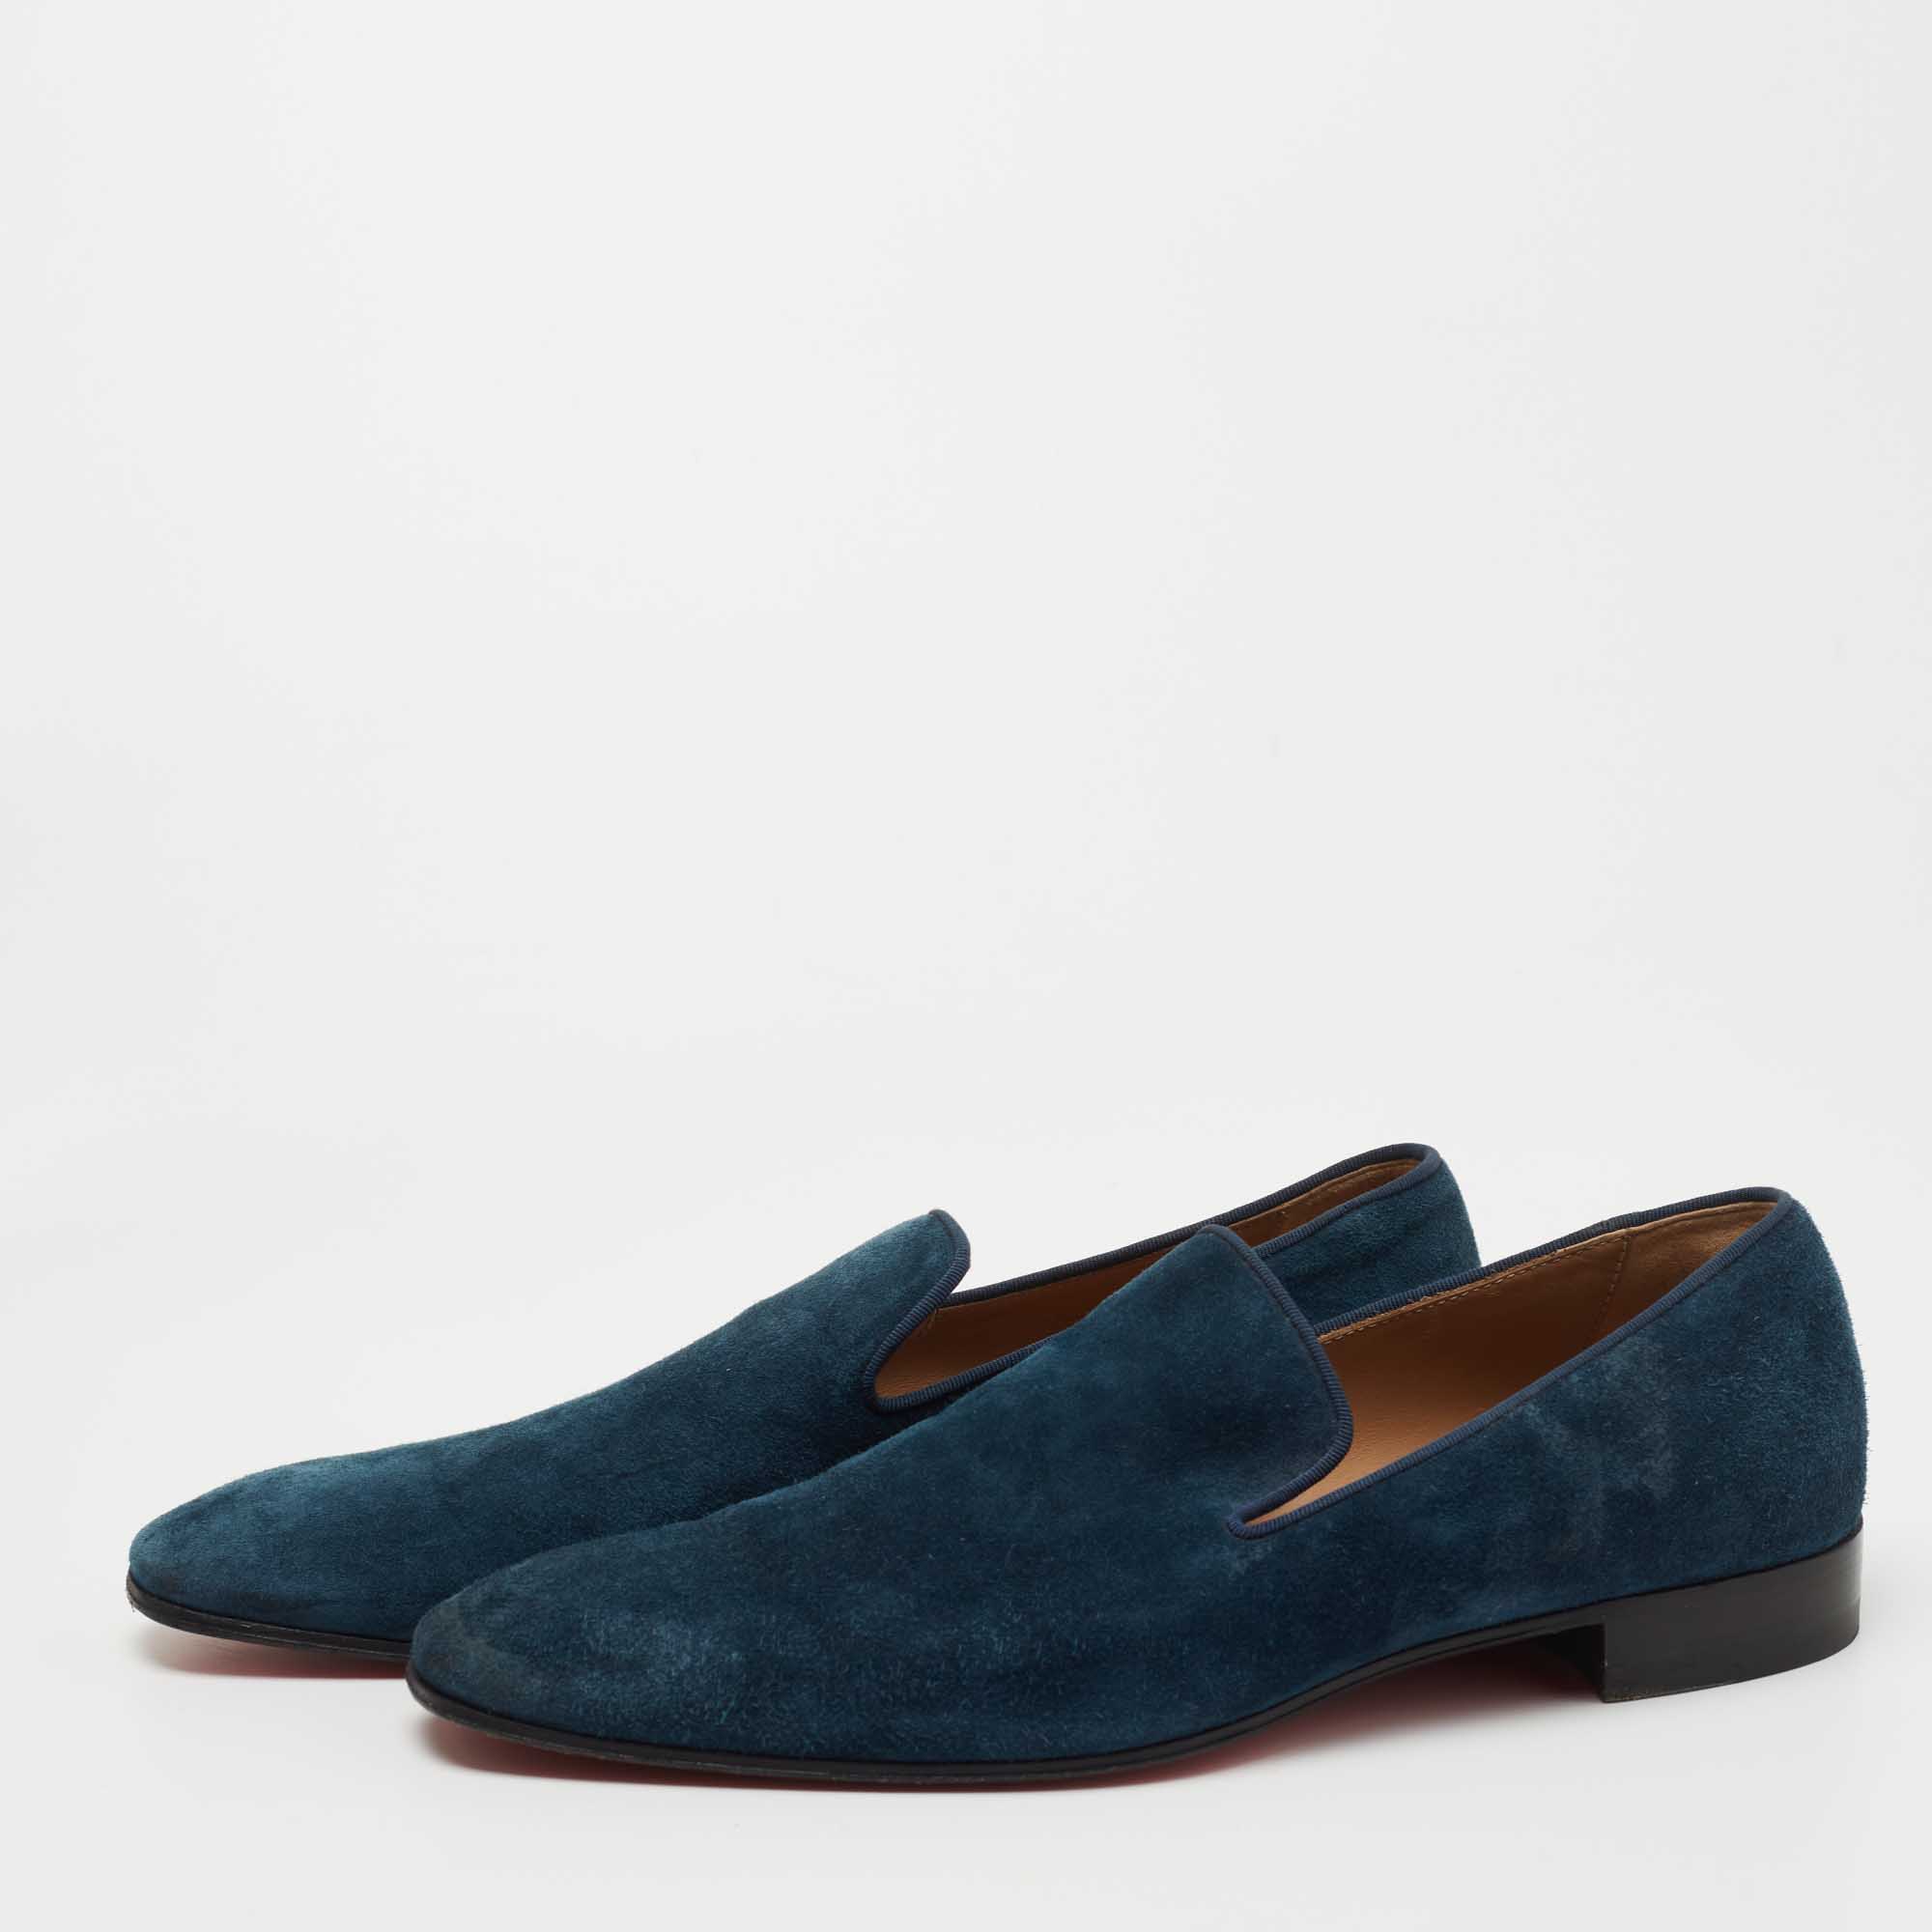 

Christian Louboutin Blue Suede Dandelion Smoking Slippers Size